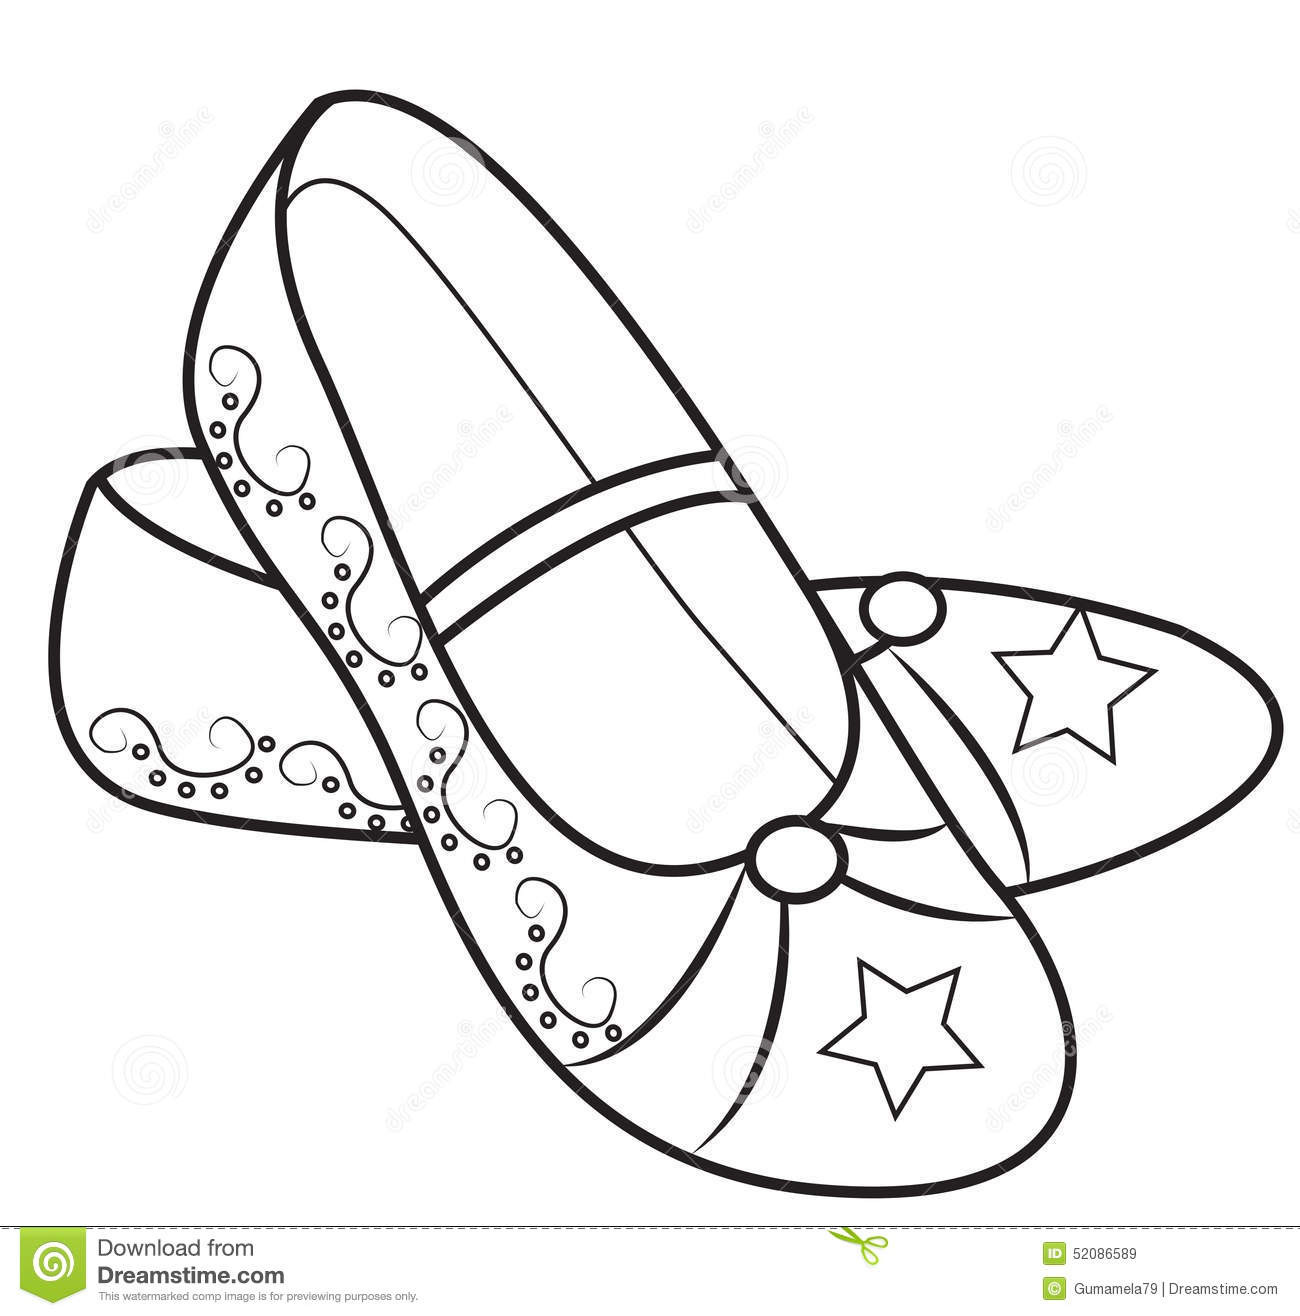 Girls Shoes Coloring Pages
 Sneakers clipart coloring Pencil and in color sneakers